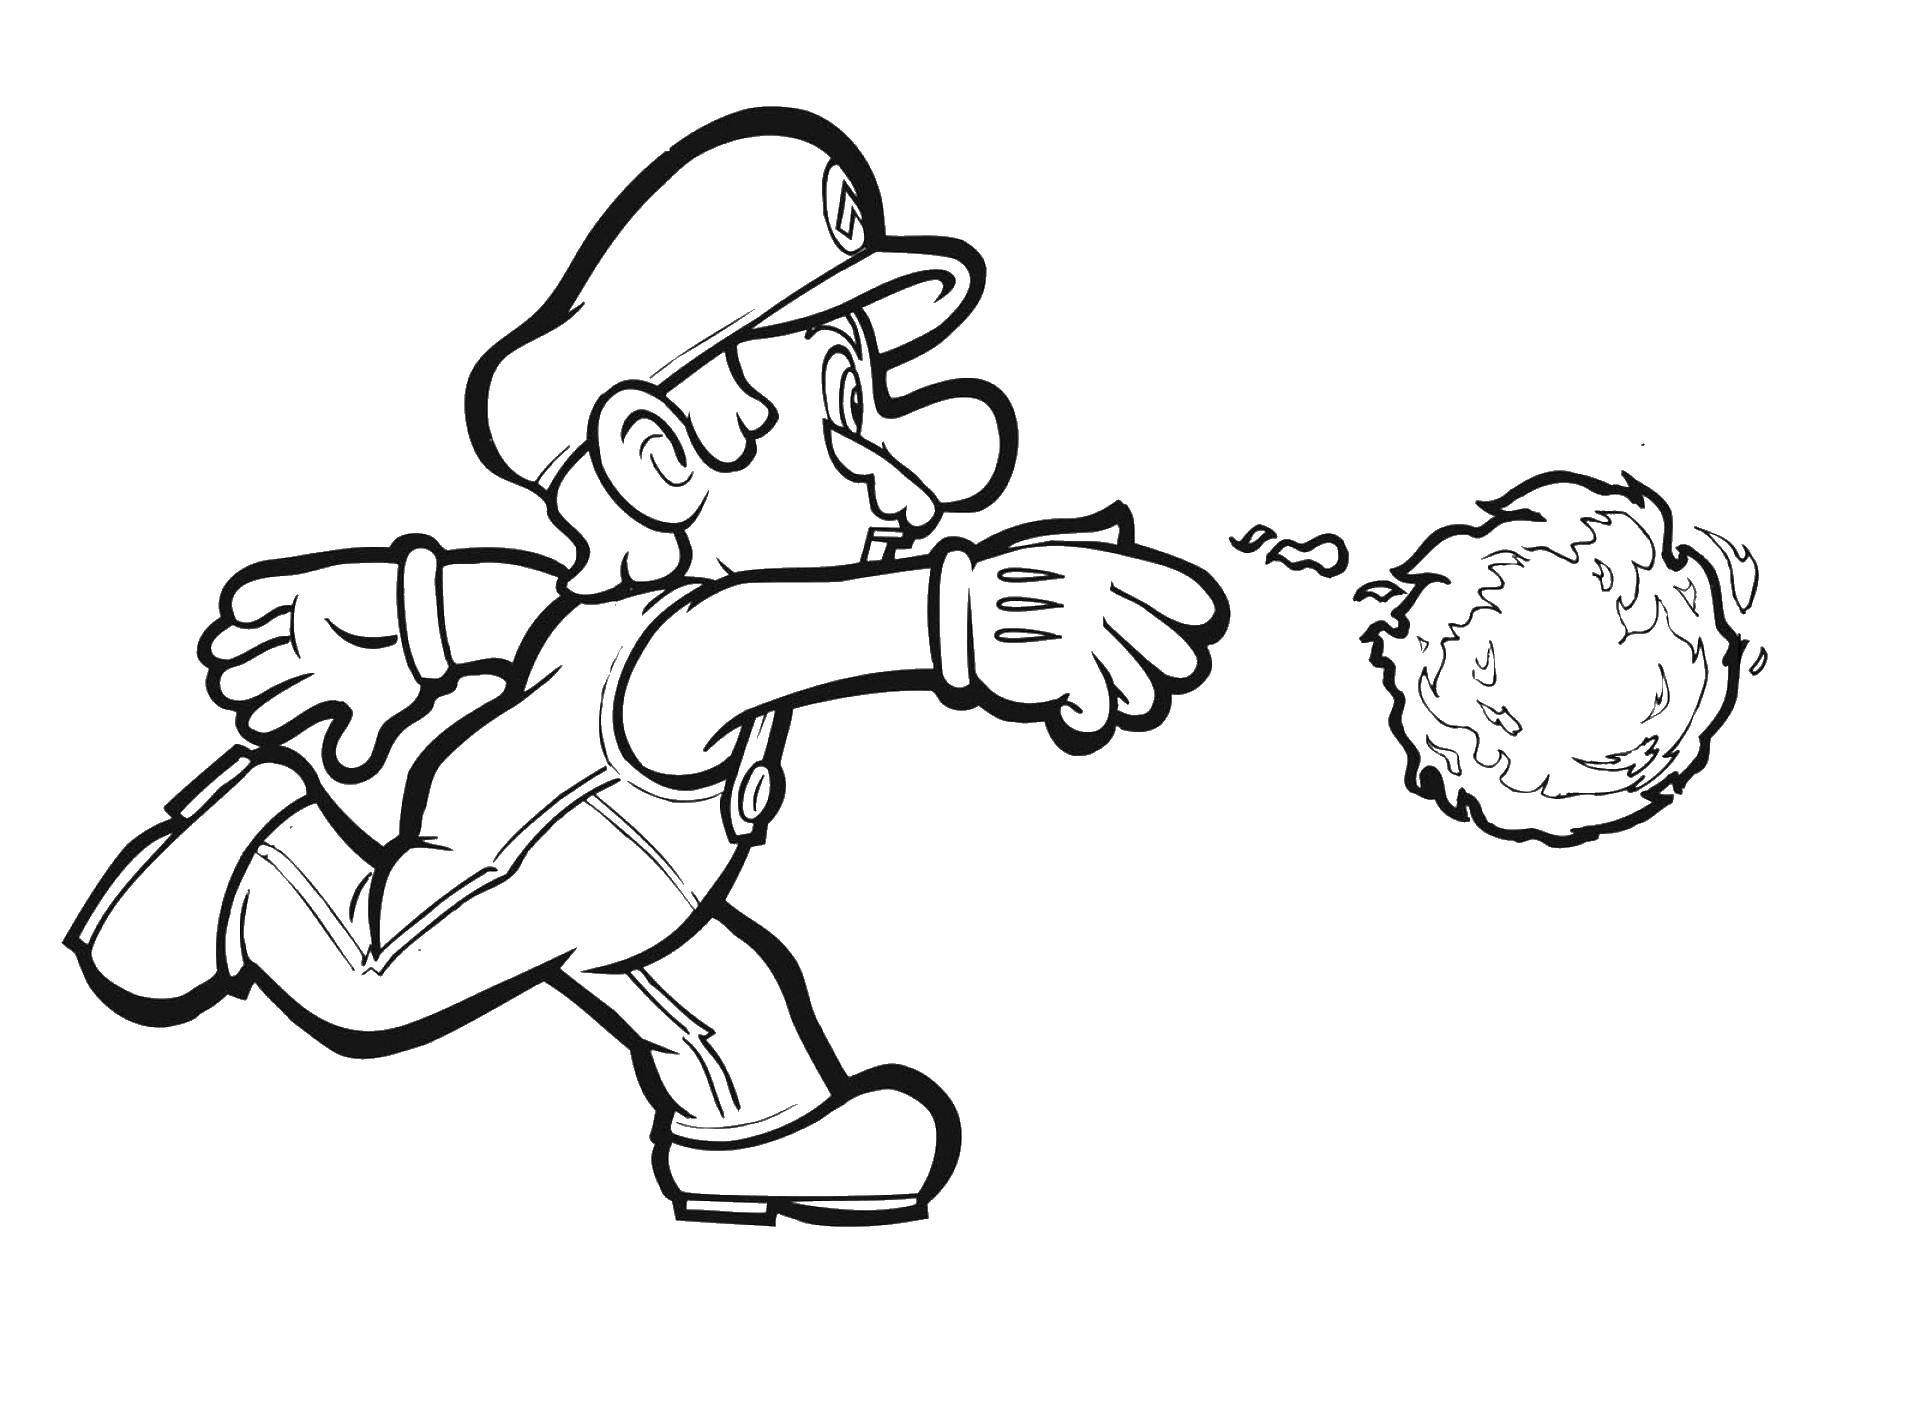 Coloring Mario defends. Category The character from the game. Tags:  Games, Mario.